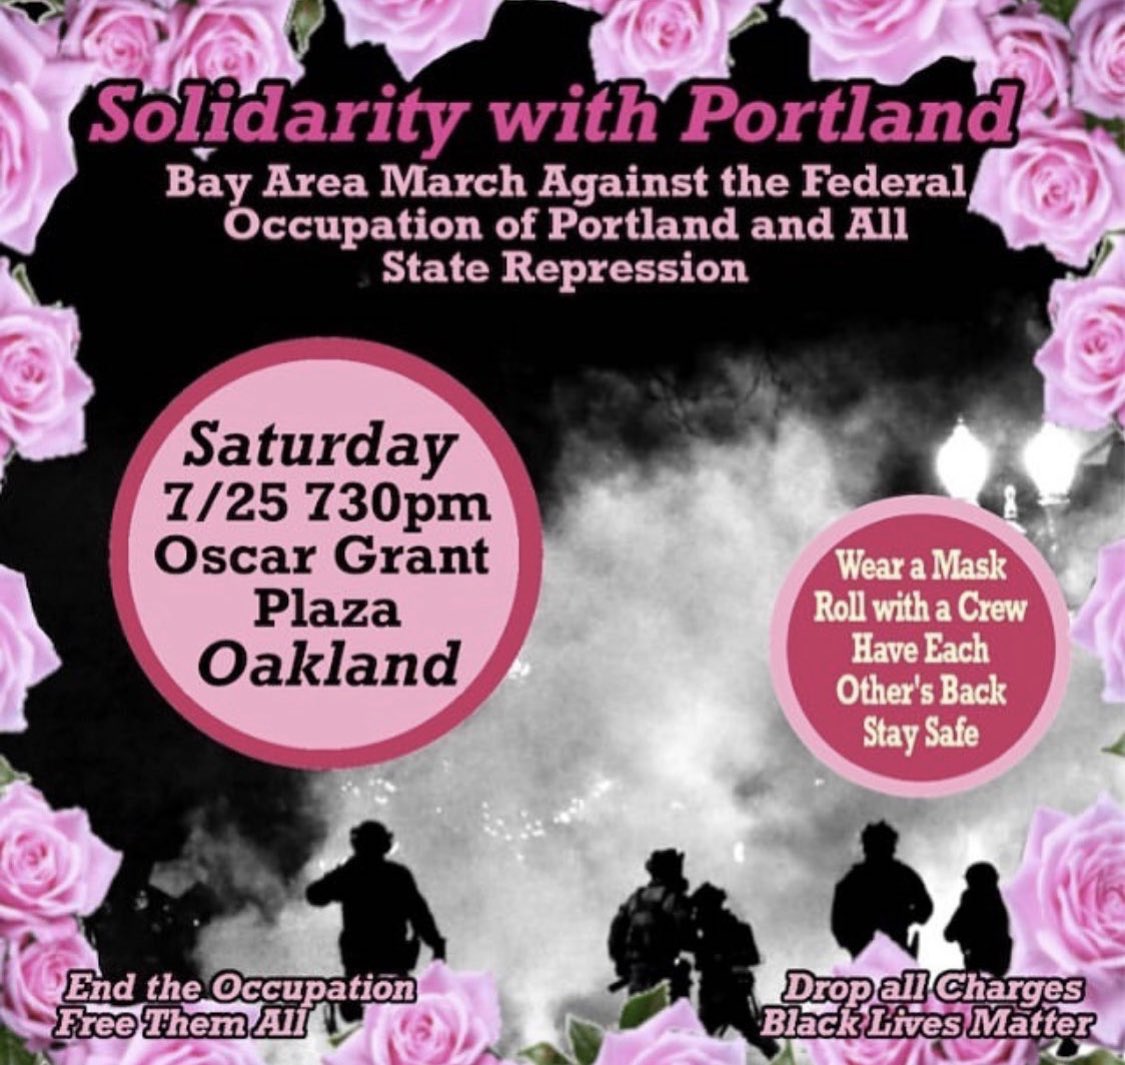 SHOUTOUT @MARINYLF FOR STANDING UP AGAINST FACISM FOR THE BAY AREA JOIN THEM TOMORROW TO #StandWithPortland #J25 AND IF TOU CANT STAND WITH THEM IN THE STREETS ATLEAST GO SEND SOME MESSAGES OF SUPPORT AND HELP SPREAD THE MESSAGE